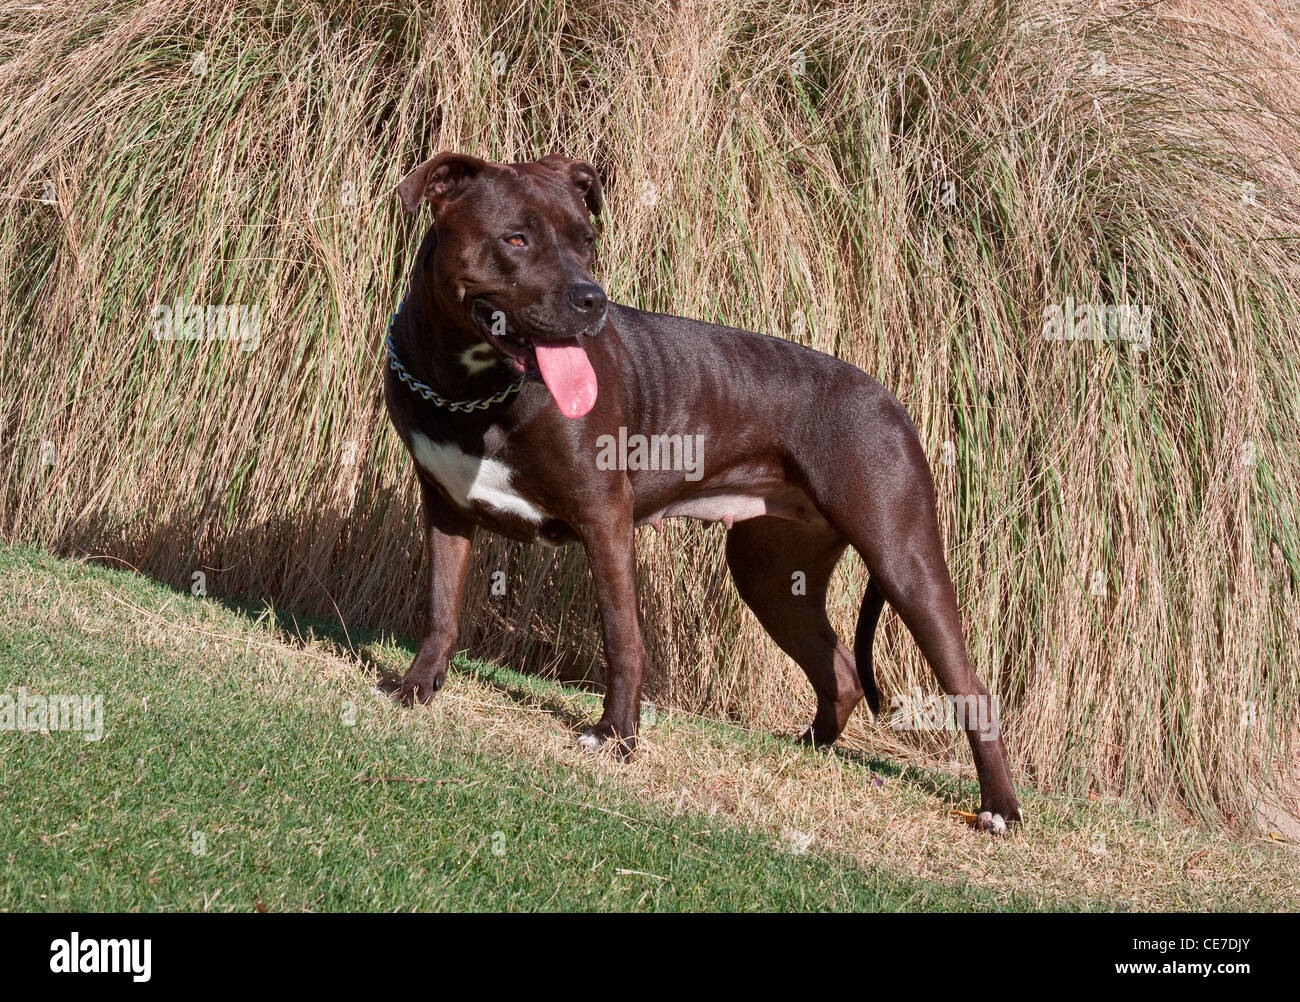 An American Pitt Bull Terrier dog standing by tall grasses at a park Stock Photo